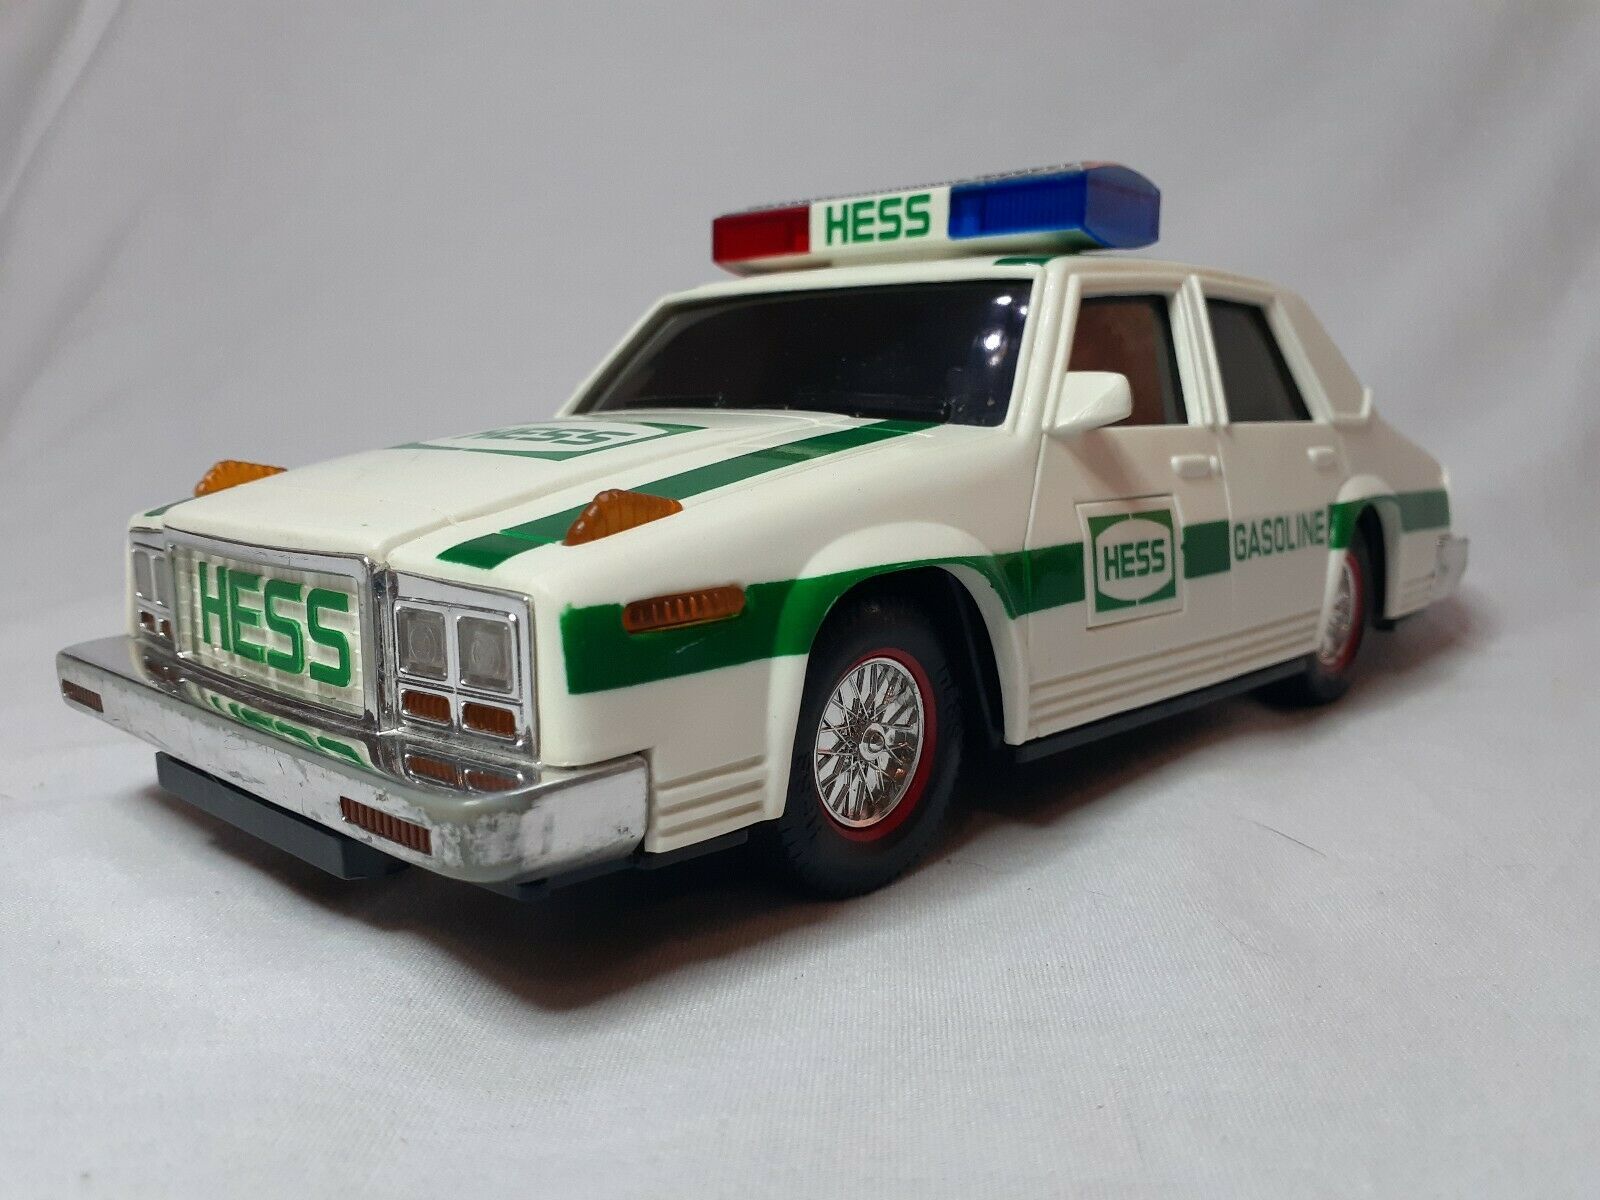 HESS 1993 POLICE PATROL CAR / ALL LIGHTS AND SIRENS WORK / 1ST NONTRUCK